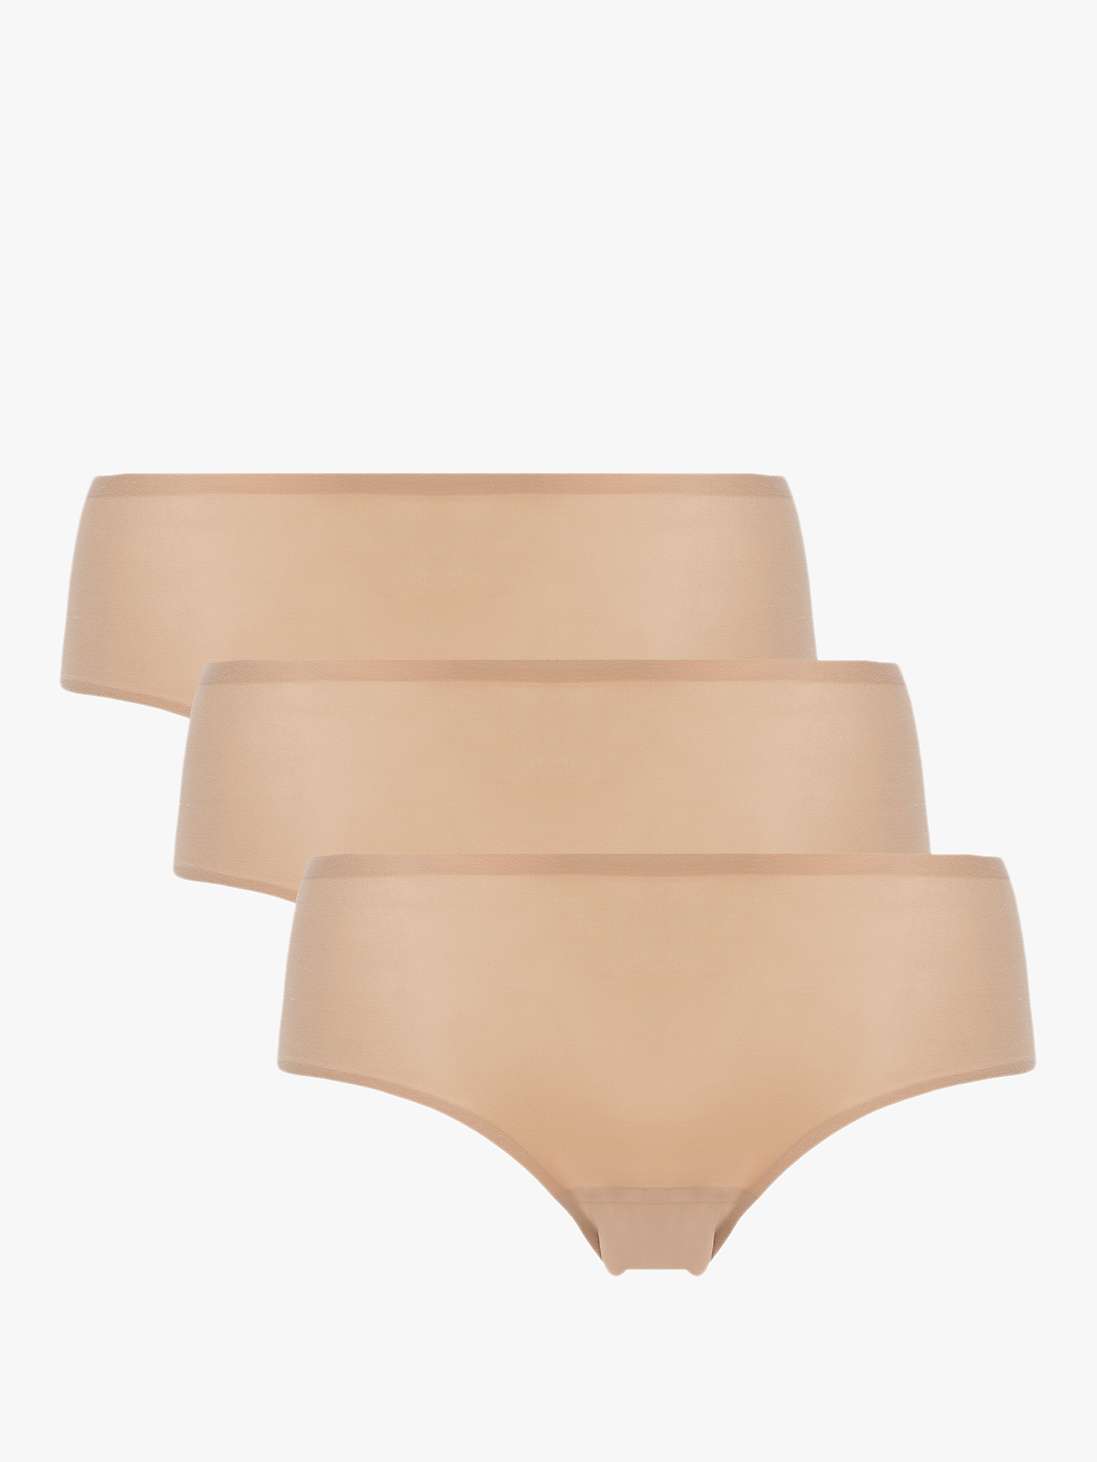 Buy Chantelle Soft Stretch Hipster Knickers, Pack of 3 Online at johnlewis.com